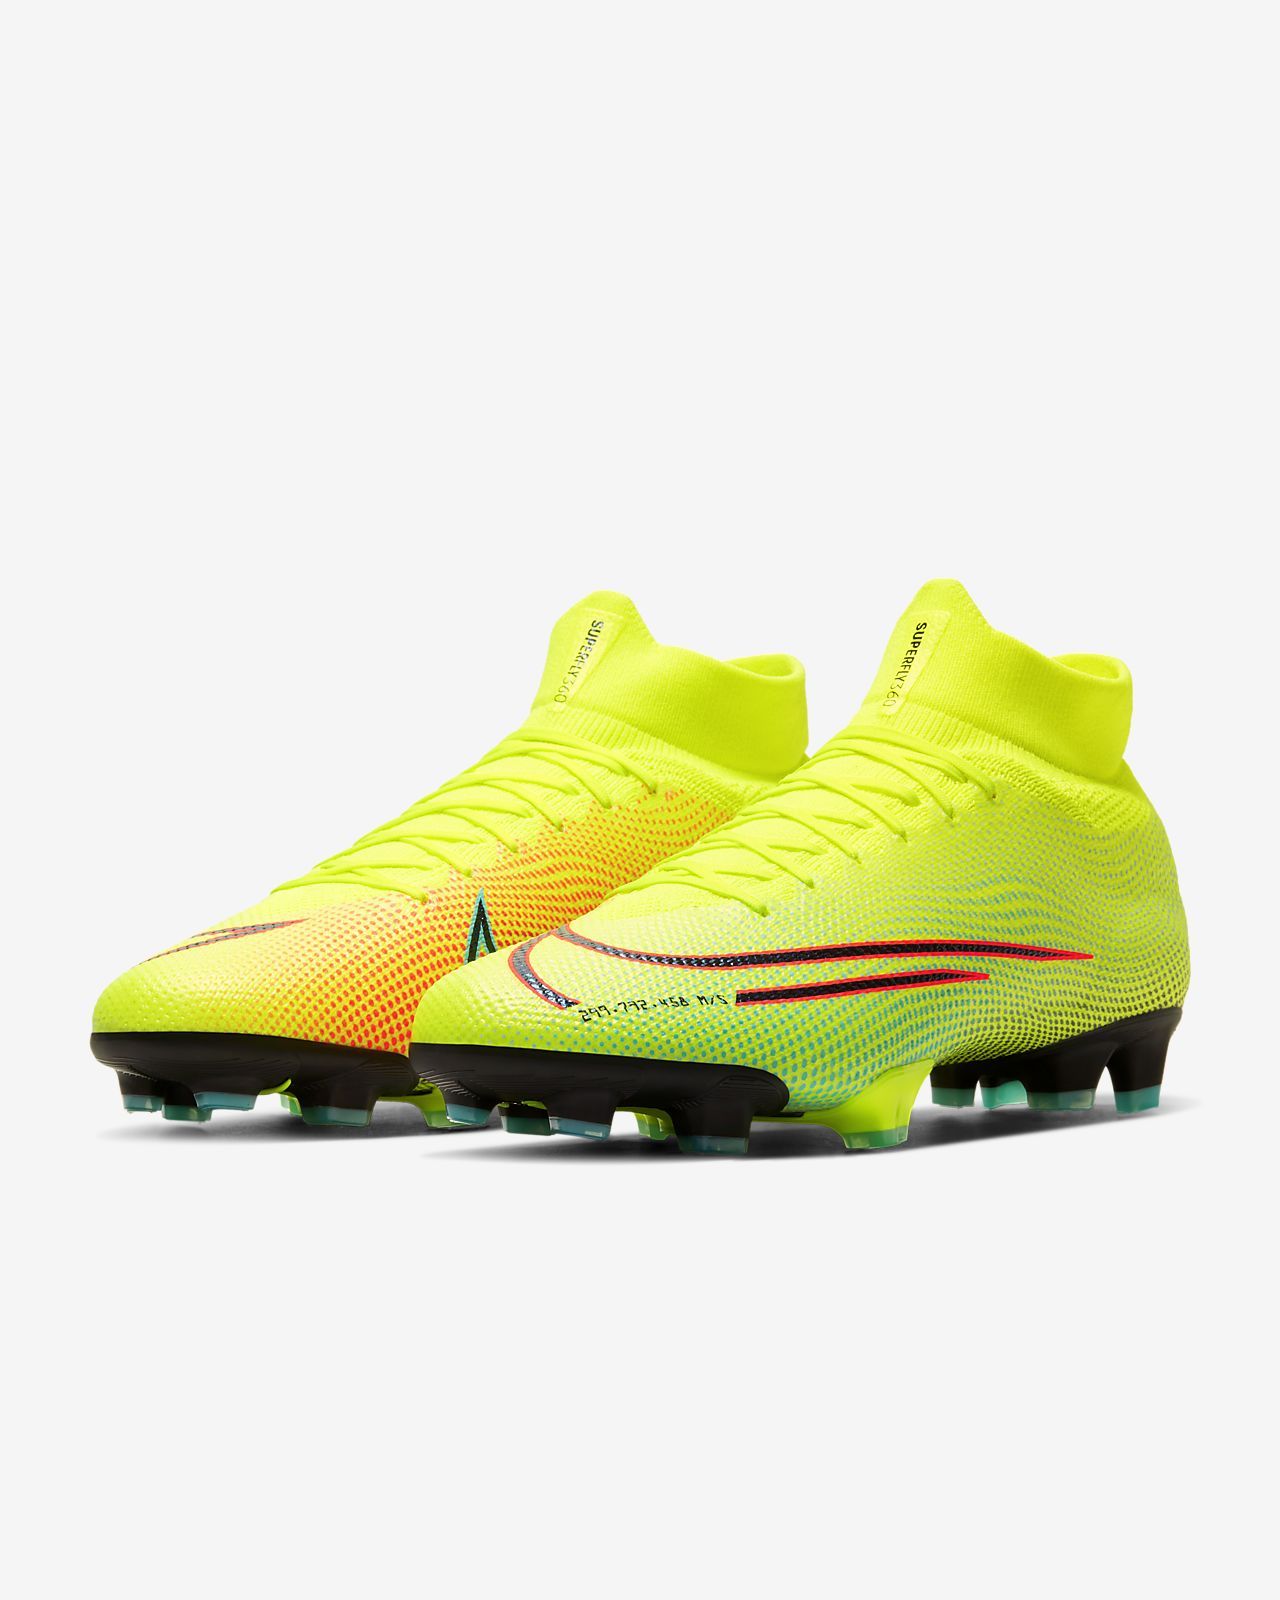 nike mercurial superfly 7 pro mds fg soccer cleats